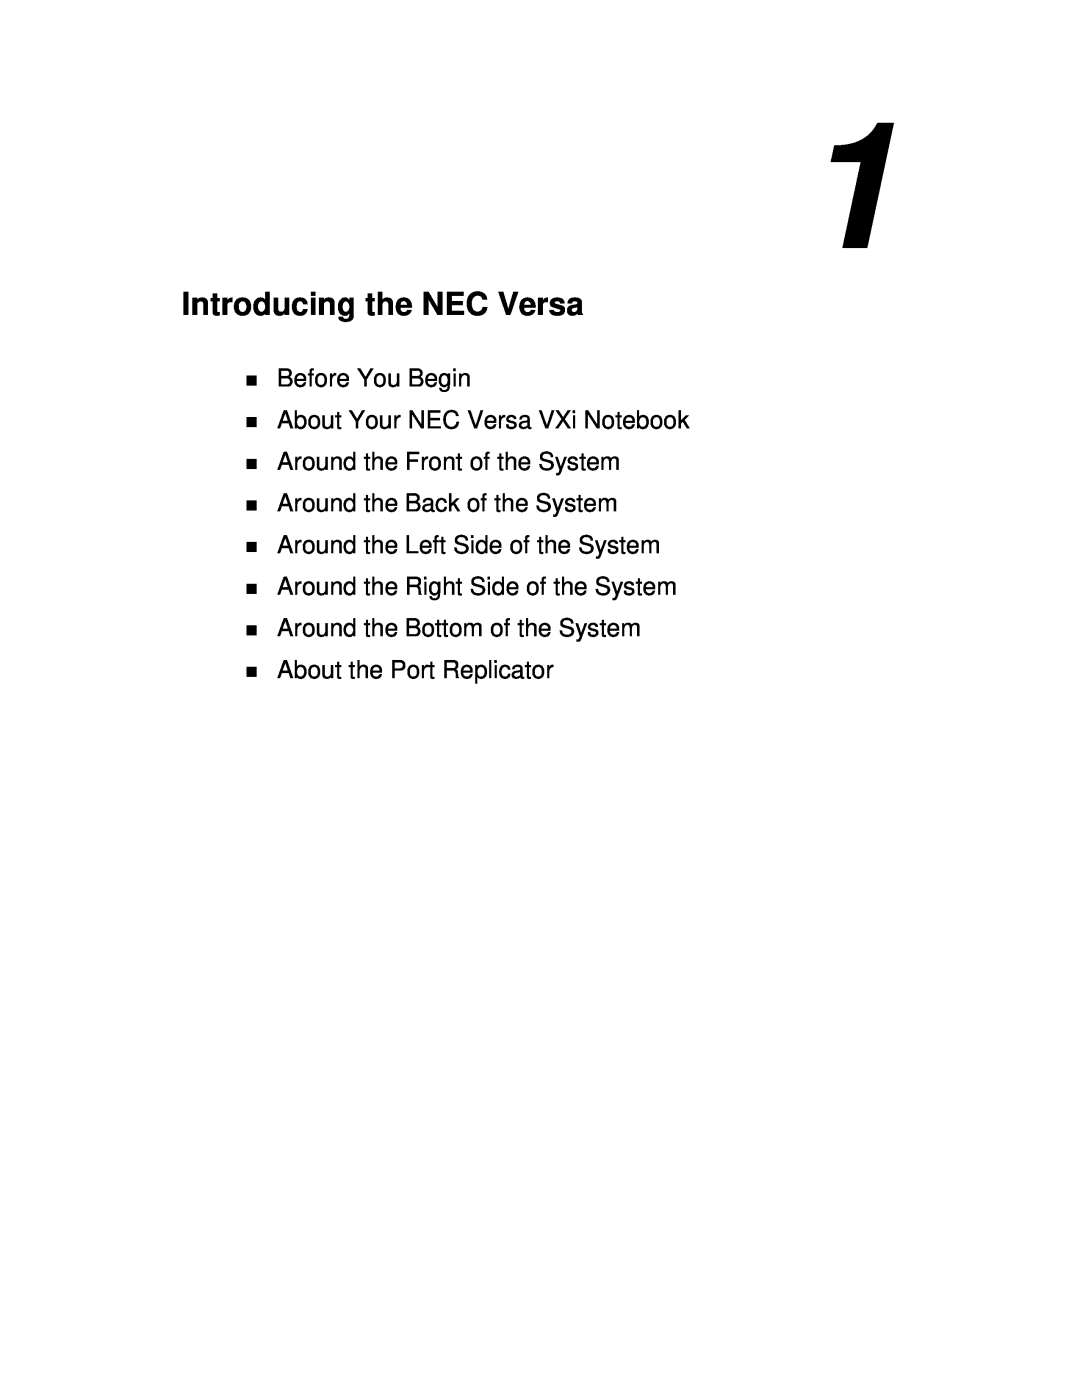 NEC Introducing the NEC Versa, Before You Begin, About Your NEC Versa VXi Notebook, Around the Front of the System 